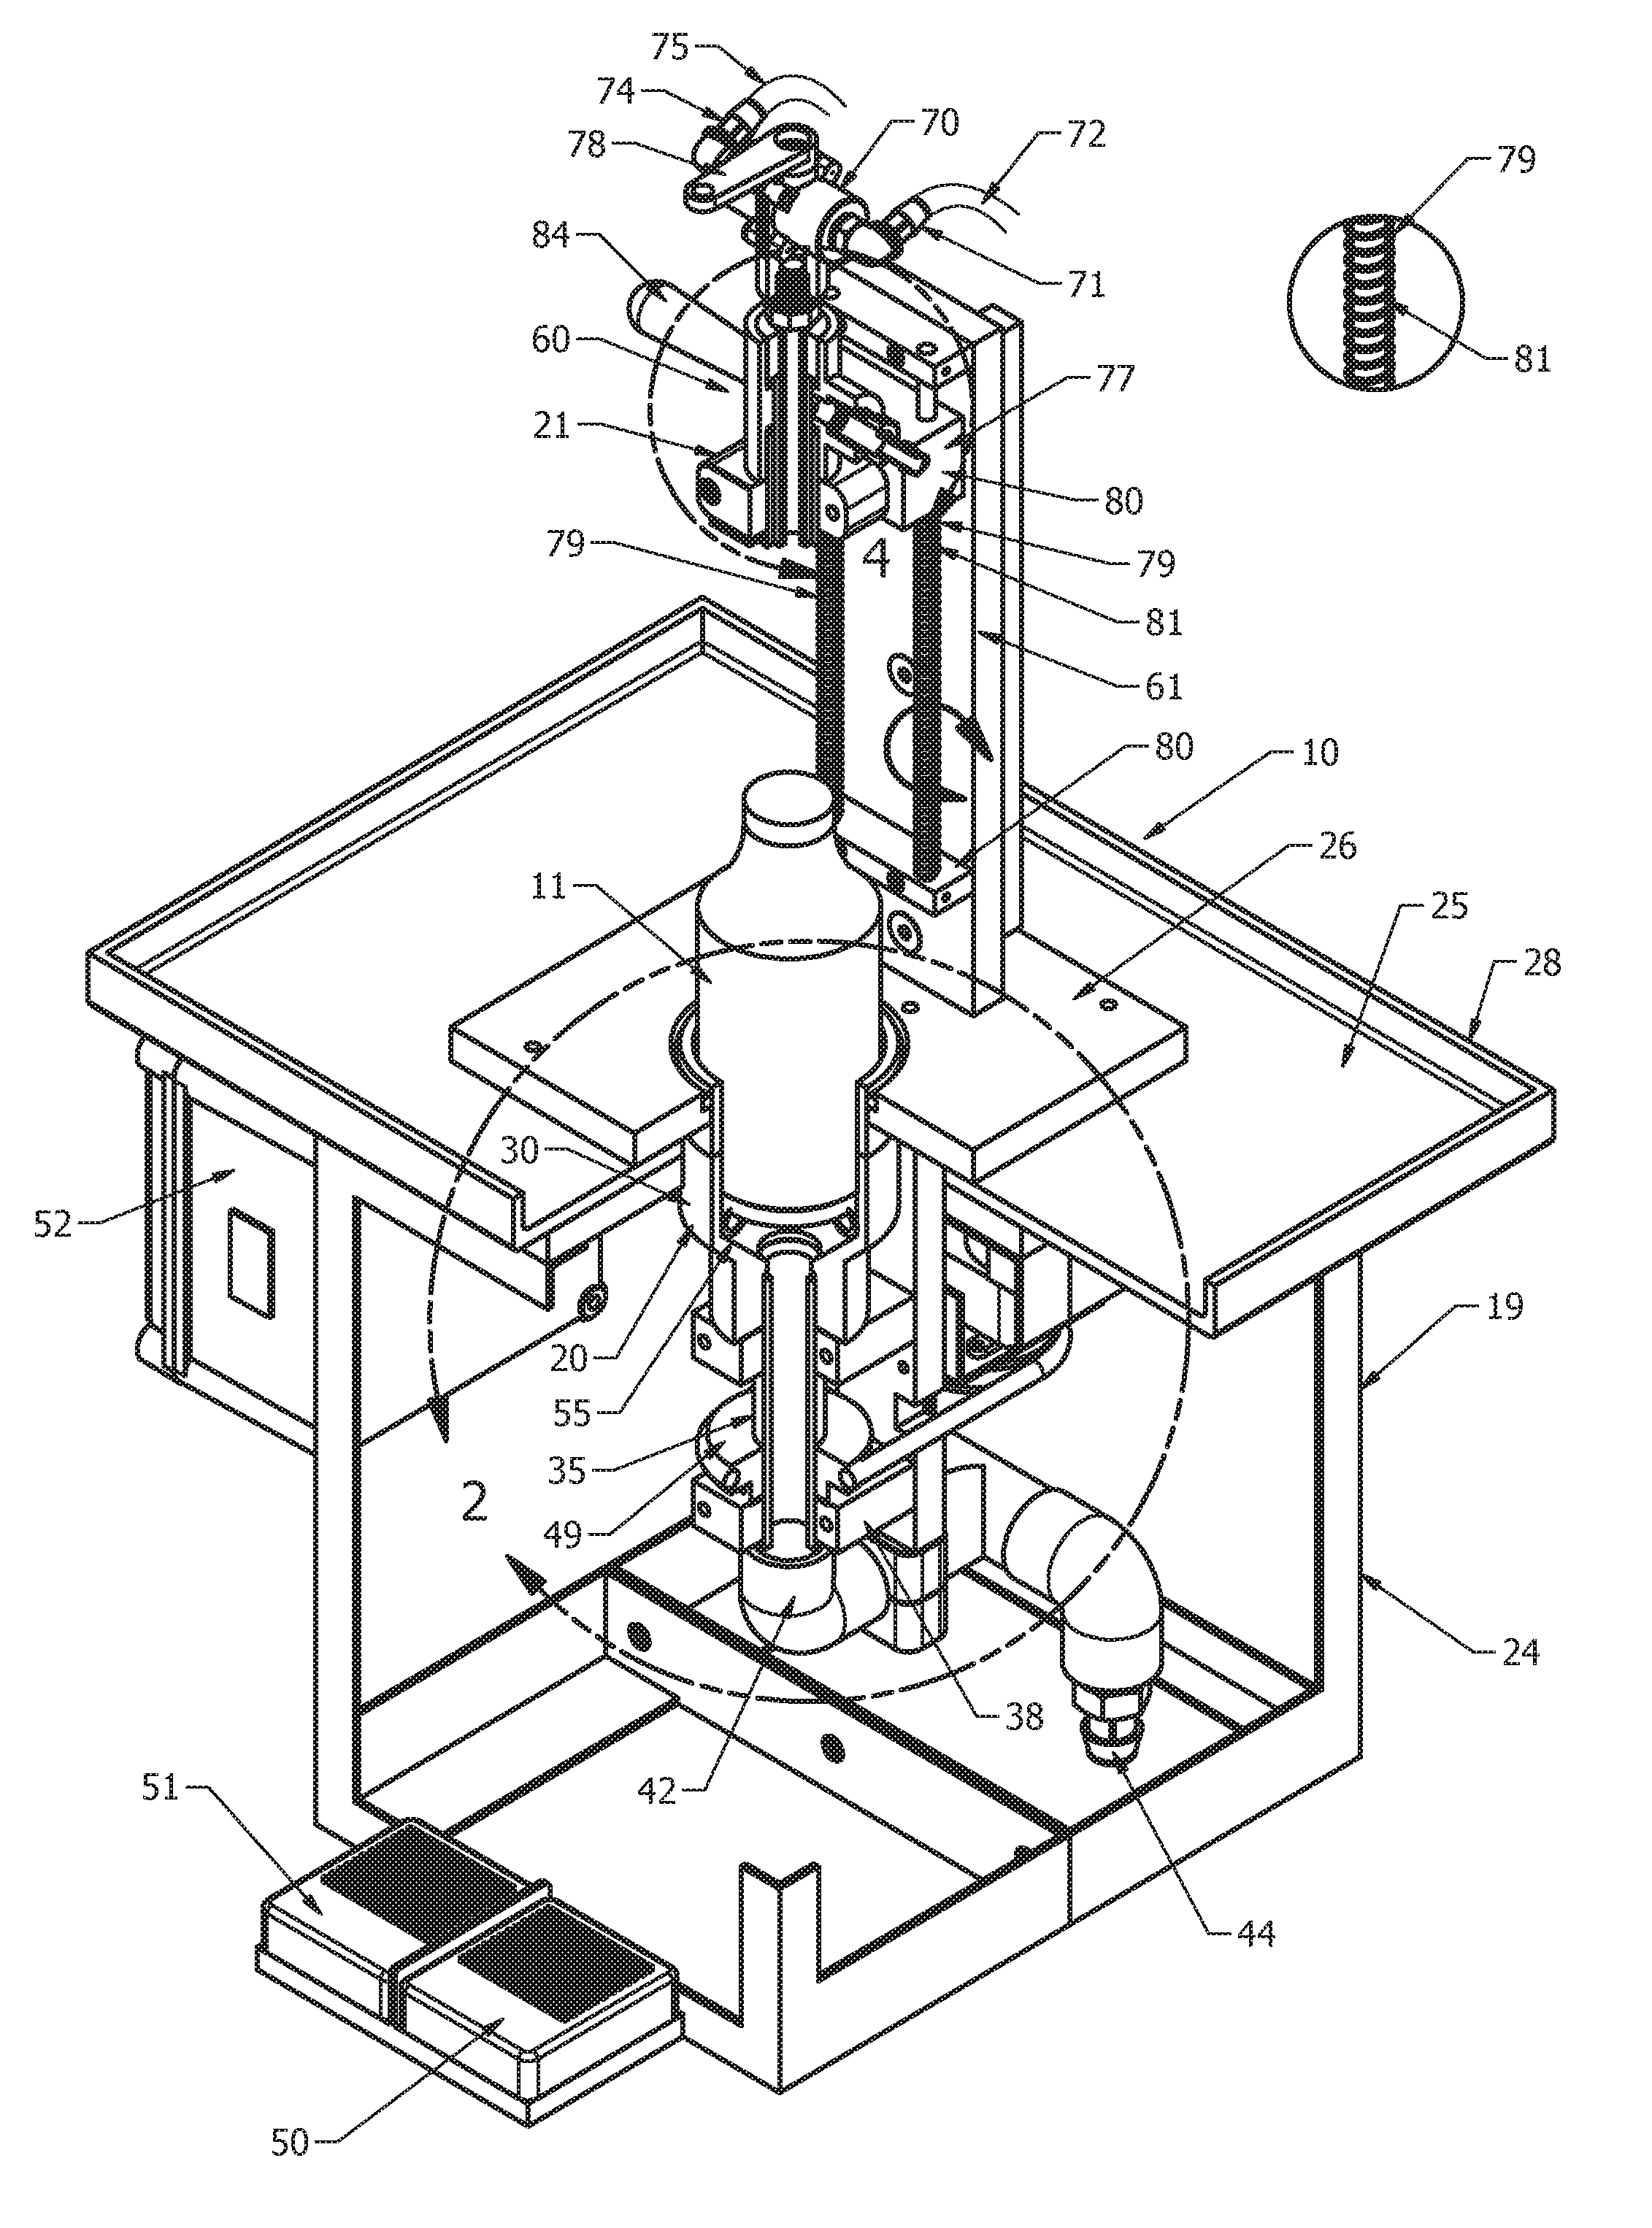 System for filling liquid containing bottles